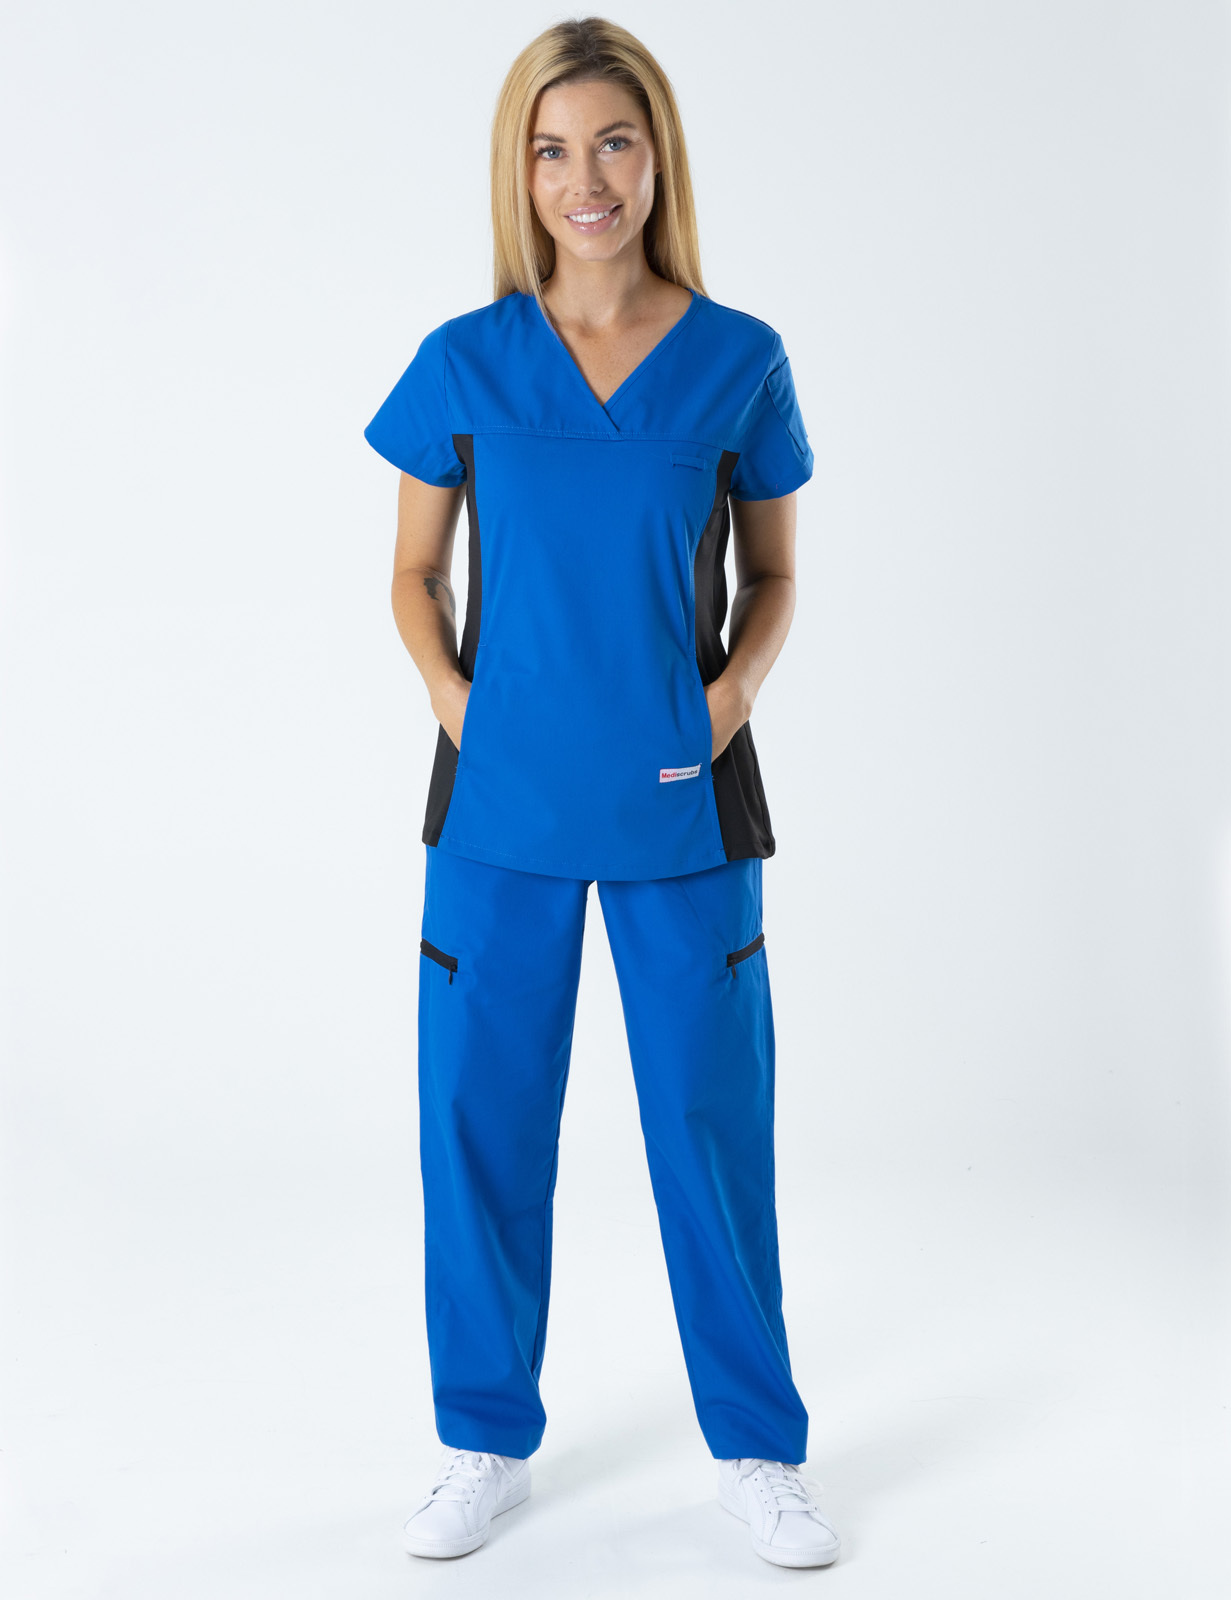 Women's Fit Solid Scrub Top With Spandex Panel - Royal - Large